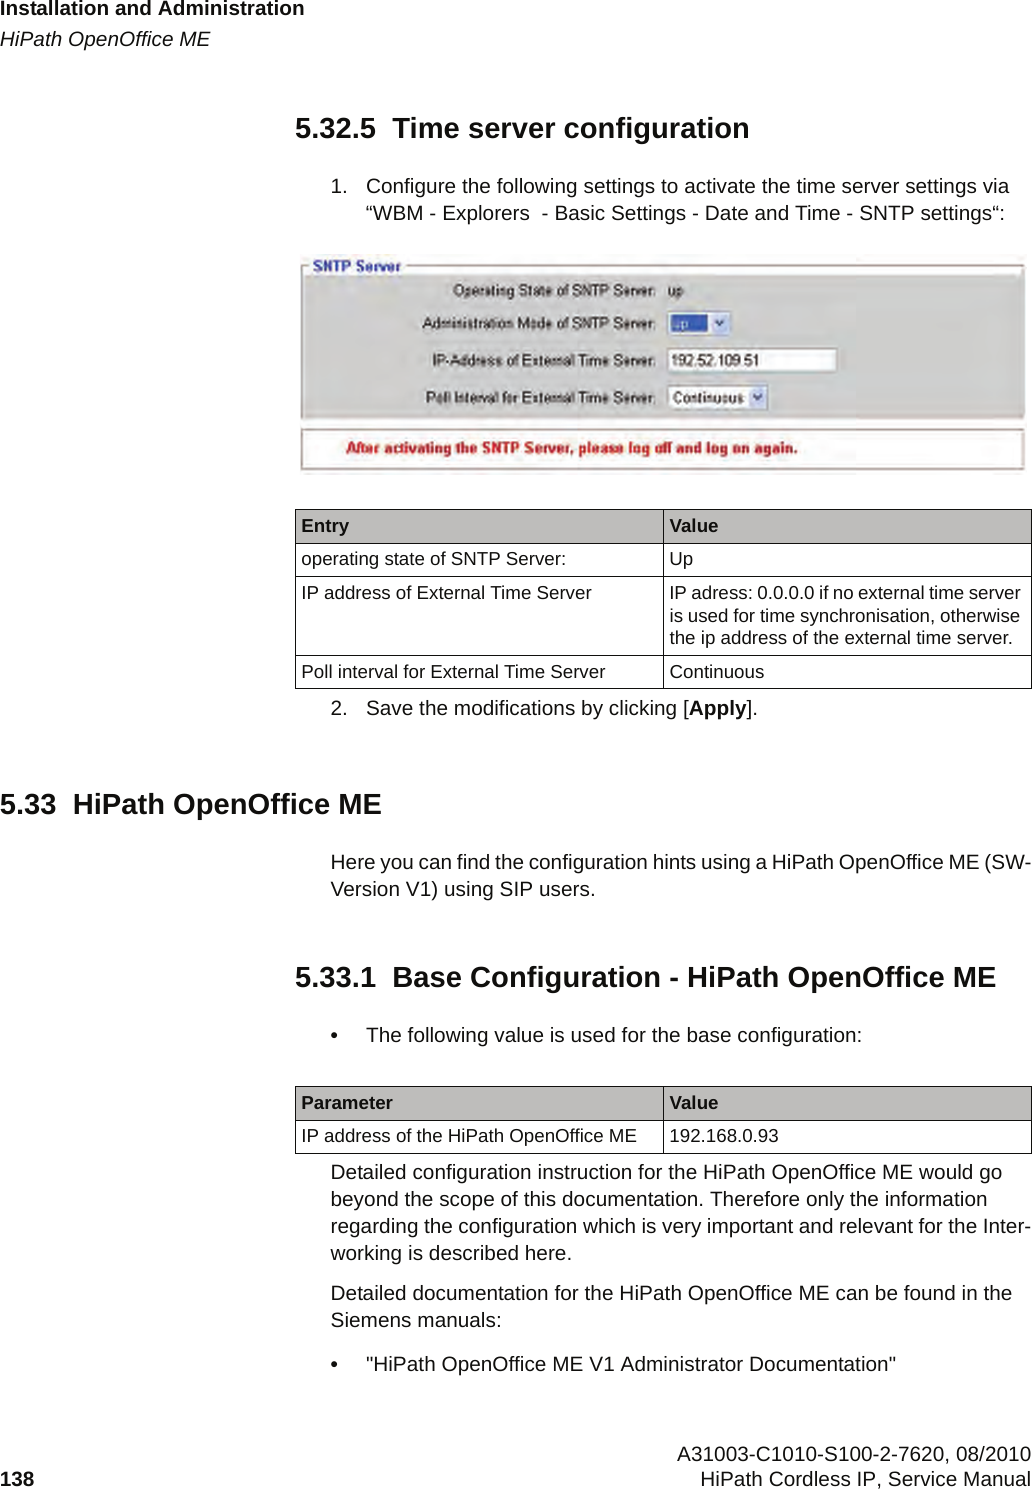 Installation and Administrationc05_ikon.fmHiPath OpenOffice ME A31003-C1010-S100-2-7620, 08/2010138 HiPath Cordless IP, Service Manual          5.32.5  Time server configuration1. Configure the following settings to activate the time server settings via “WBM - Explorers  - Basic Settings - Date and Time - SNTP settings“: 2. Save the modifications by clicking [Apply].5.33  HiPath OpenOffice MEHere you can find the configuration hints using a HiPath OpenOffice ME (SW-Version V1) using SIP users.5.33.1  Base Configuration - HiPath OpenOffice ME•The following value is used for the base configuration:Detailed configuration instruction for the HiPath OpenOffice ME would go beyond the scope of this documentation. Therefore only the information regarding the configuration which is very important and relevant for the Inter-working is described here.Detailed documentation for the HiPath OpenOffice ME can be found in the Siemens manuals:•&quot;HiPath OpenOffice ME V1 Administrator Documentation&quot; Entry Valueoperating state of SNTP Server: UpIP address of External Time Server IP adress: 0.0.0.0 if no external time server is used for time synchronisation, otherwise the ip address of the external time server.Poll interval for External Time Server ContinuousParameter ValueIP address of the HiPath OpenOffice ME 192.168.0.93